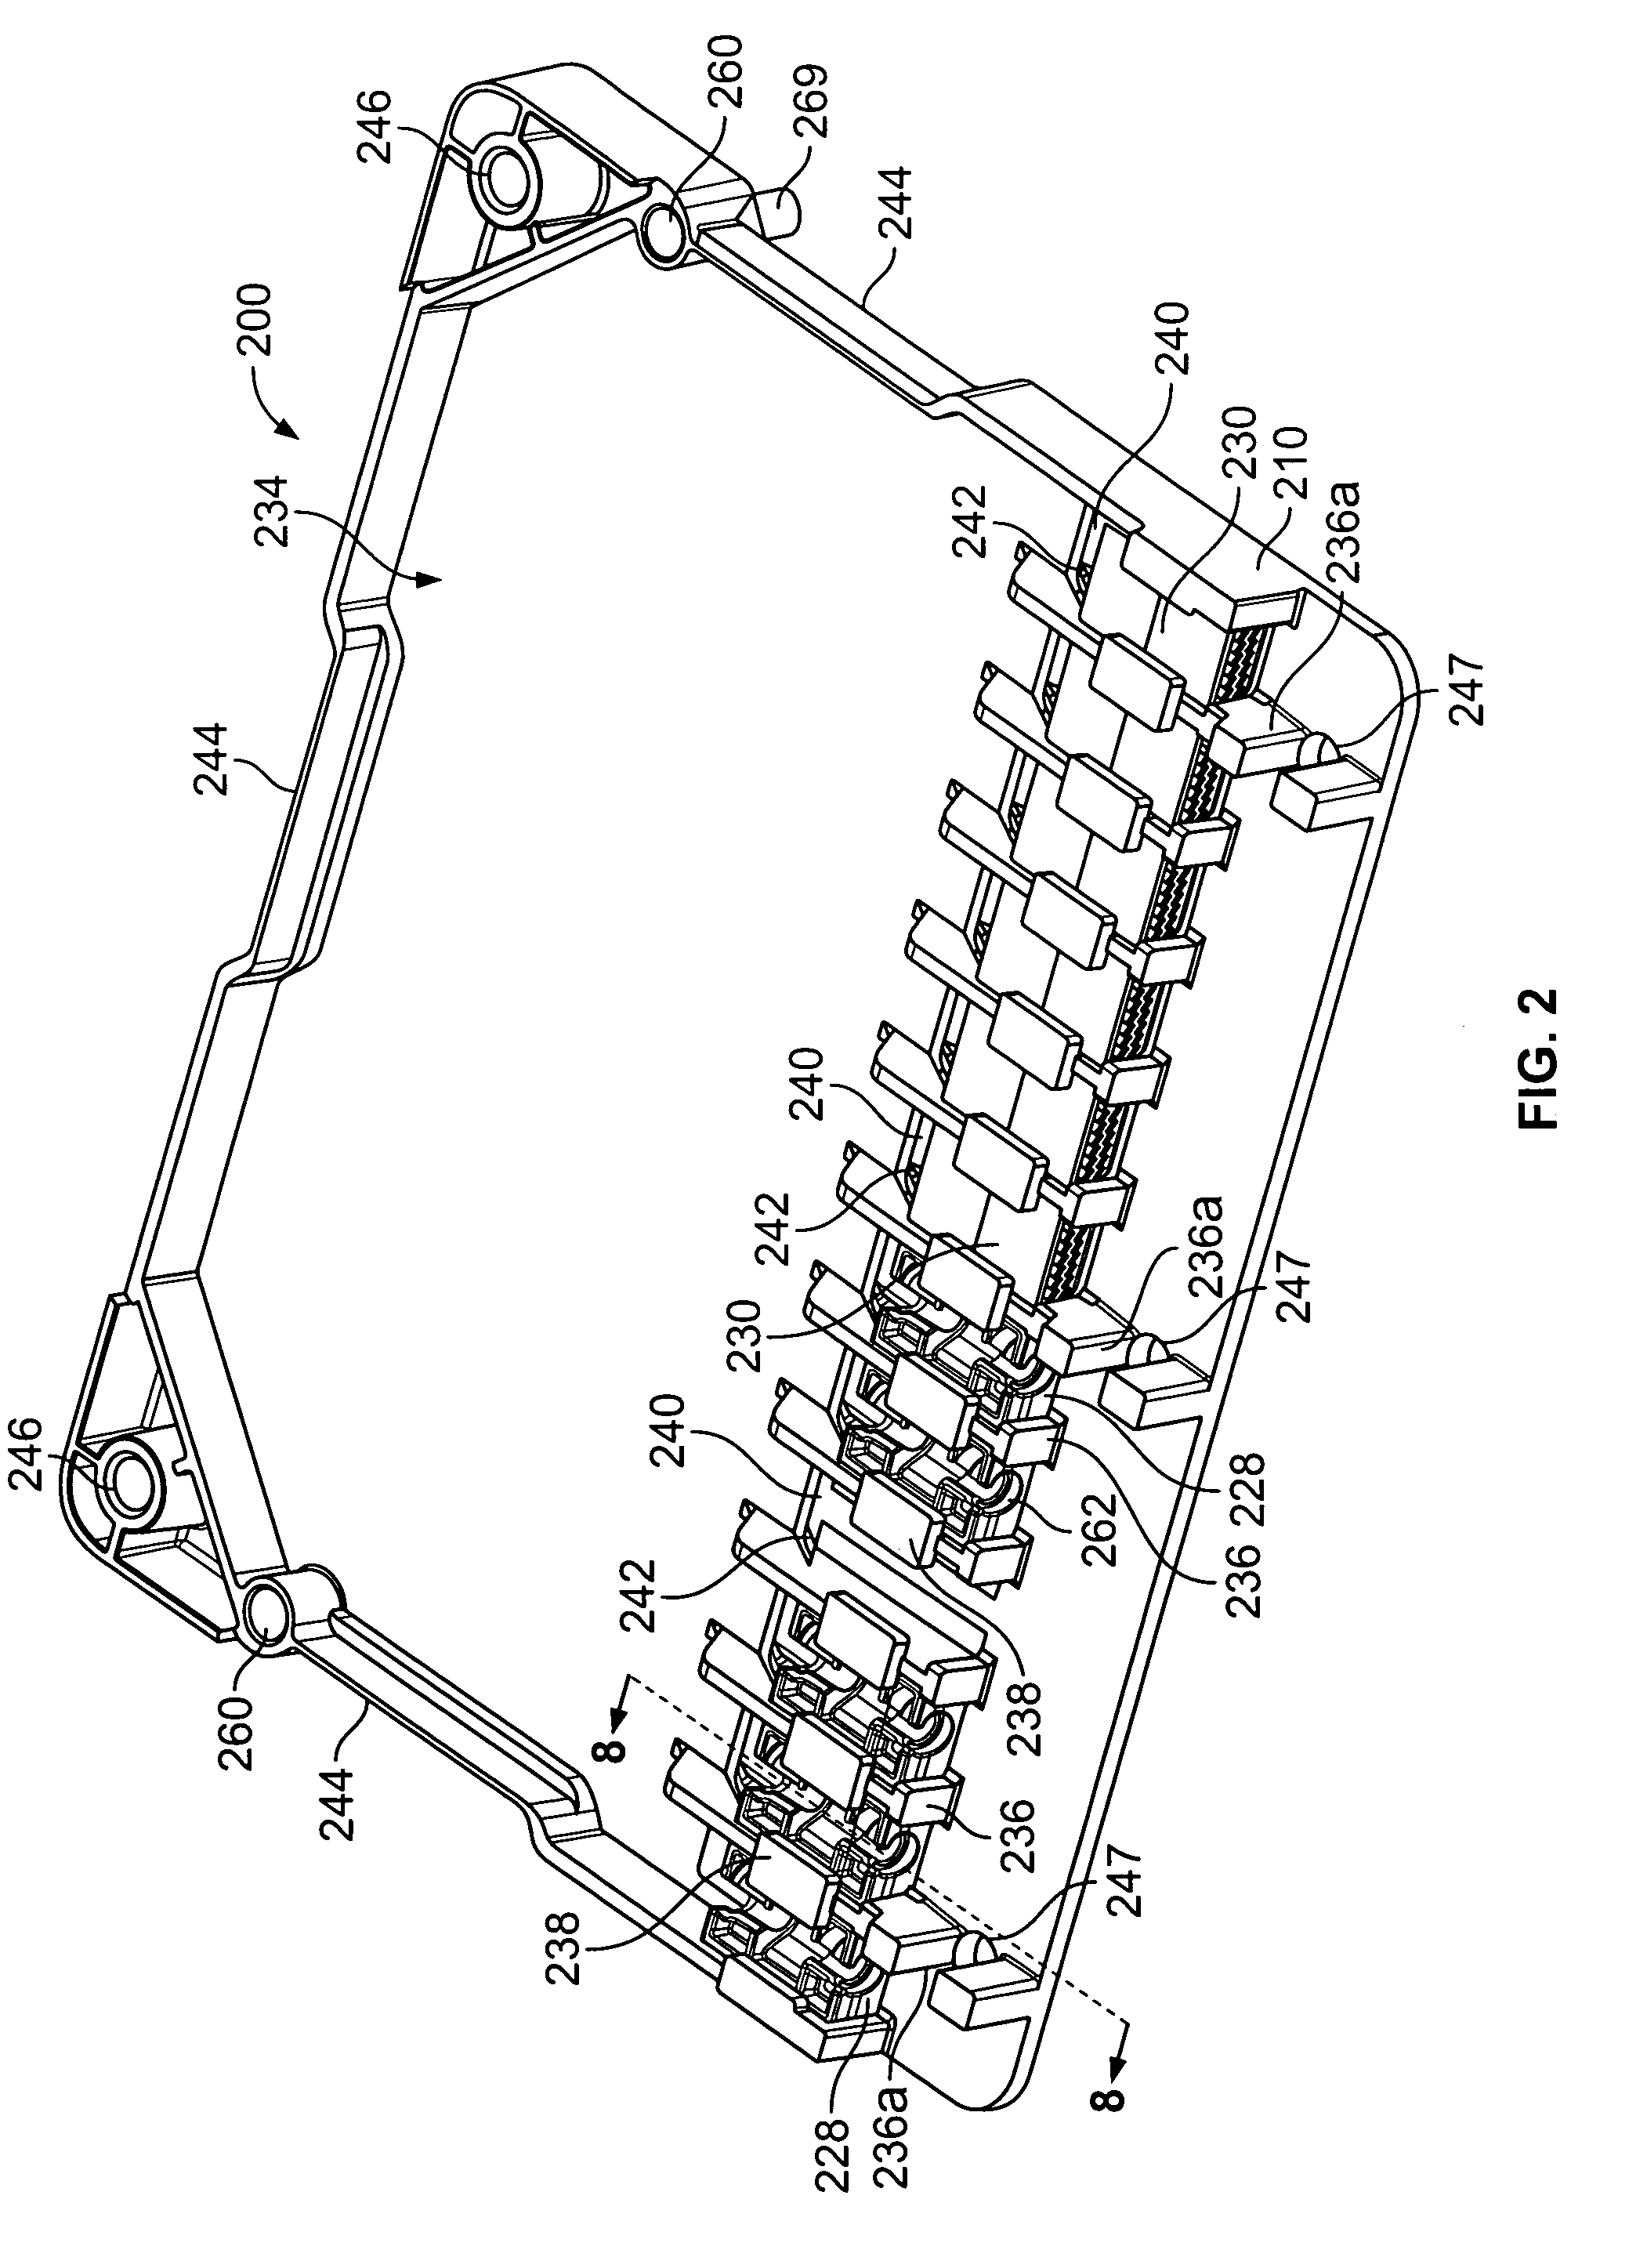 Optical fiber fanout devices and methods for forming the same